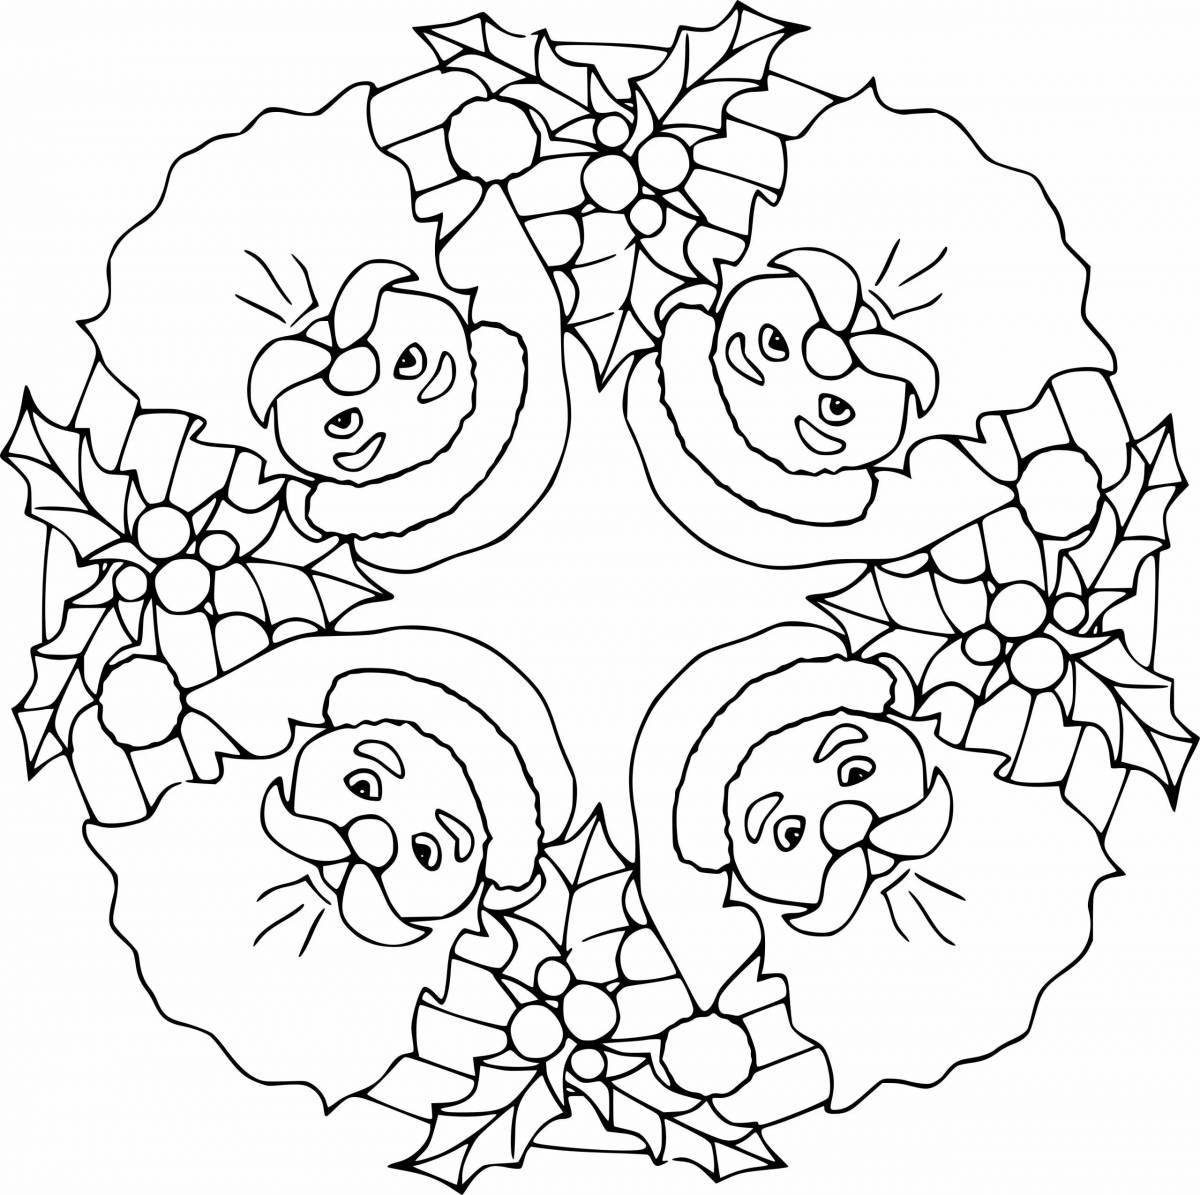 Gorgeous winter mandala coloring book for kids